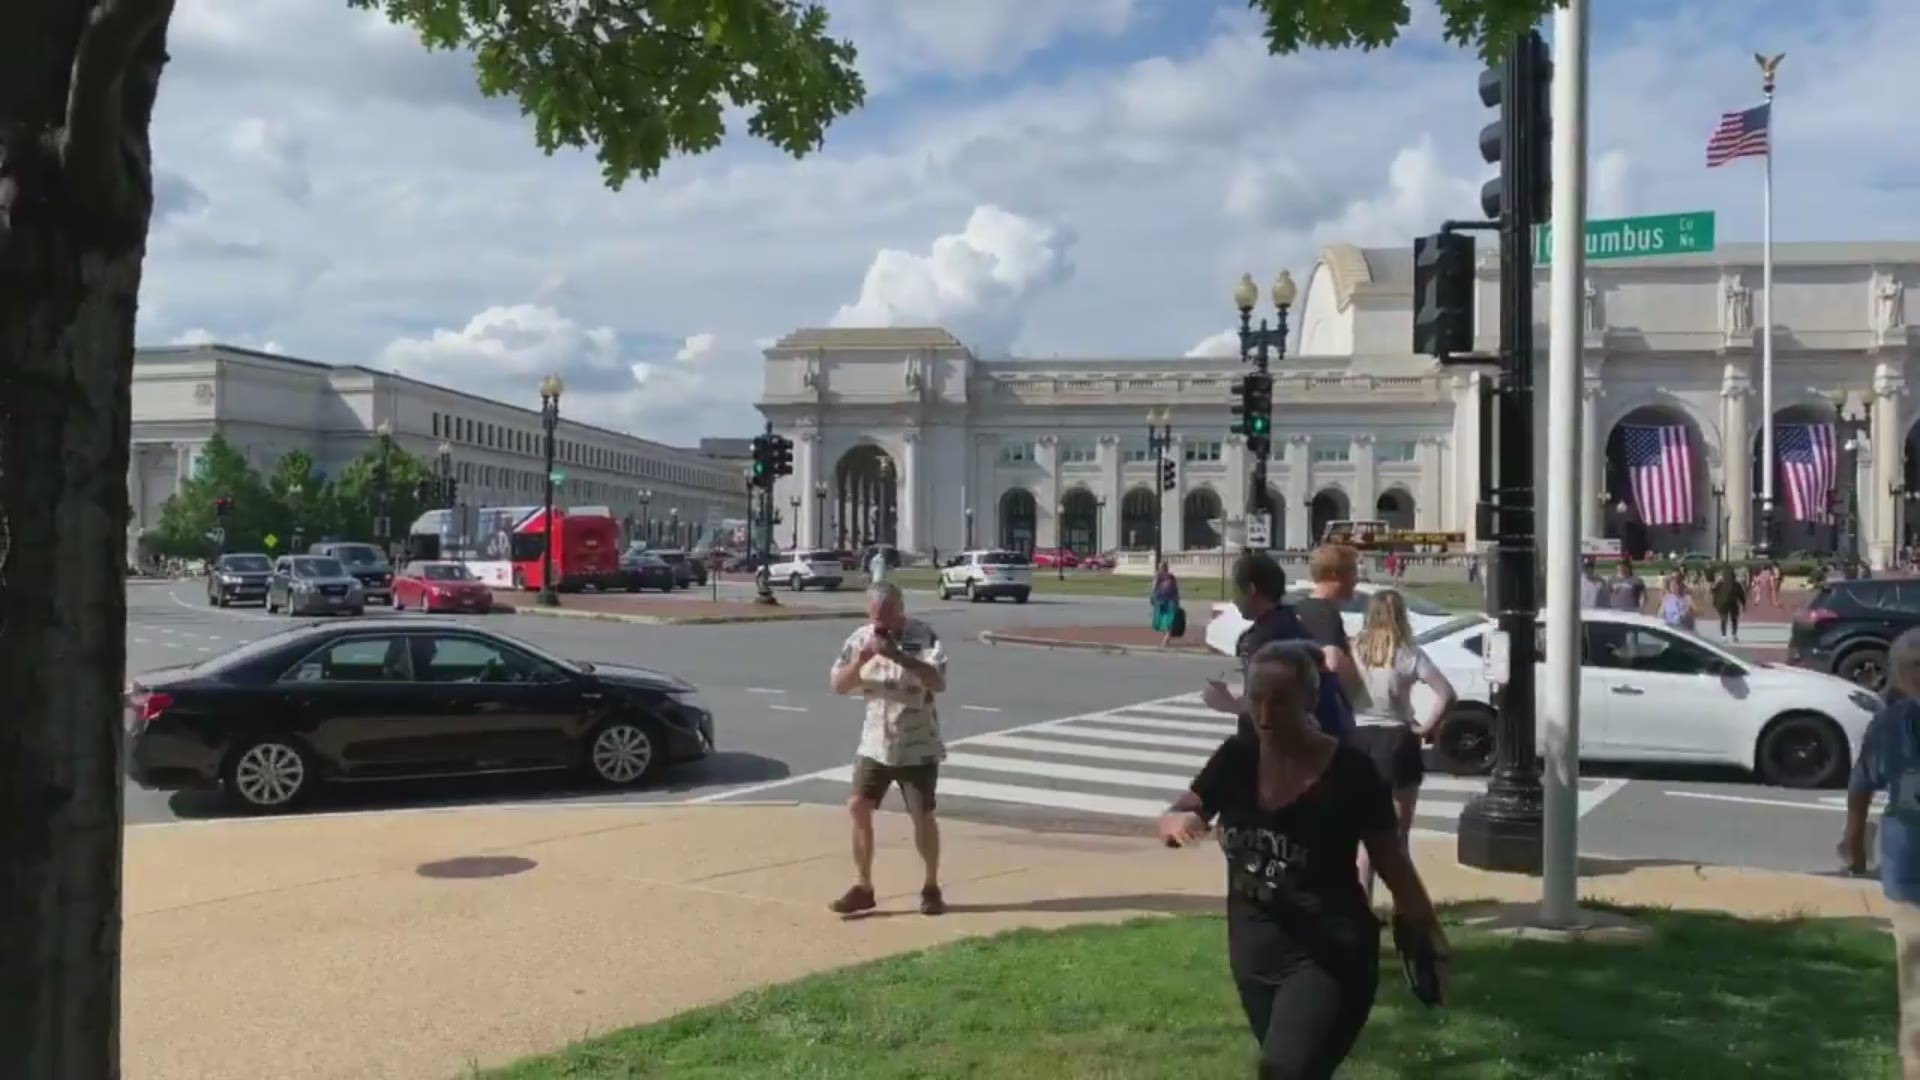 Chaos erupted after someone reportedly set off fireworks inside Union Station on Sunday. The loud noise sent travelers into a frenzy thinking there was an active shooter. DC police confirmed there was no active shooter or shots fired despite reports circulating on social media.